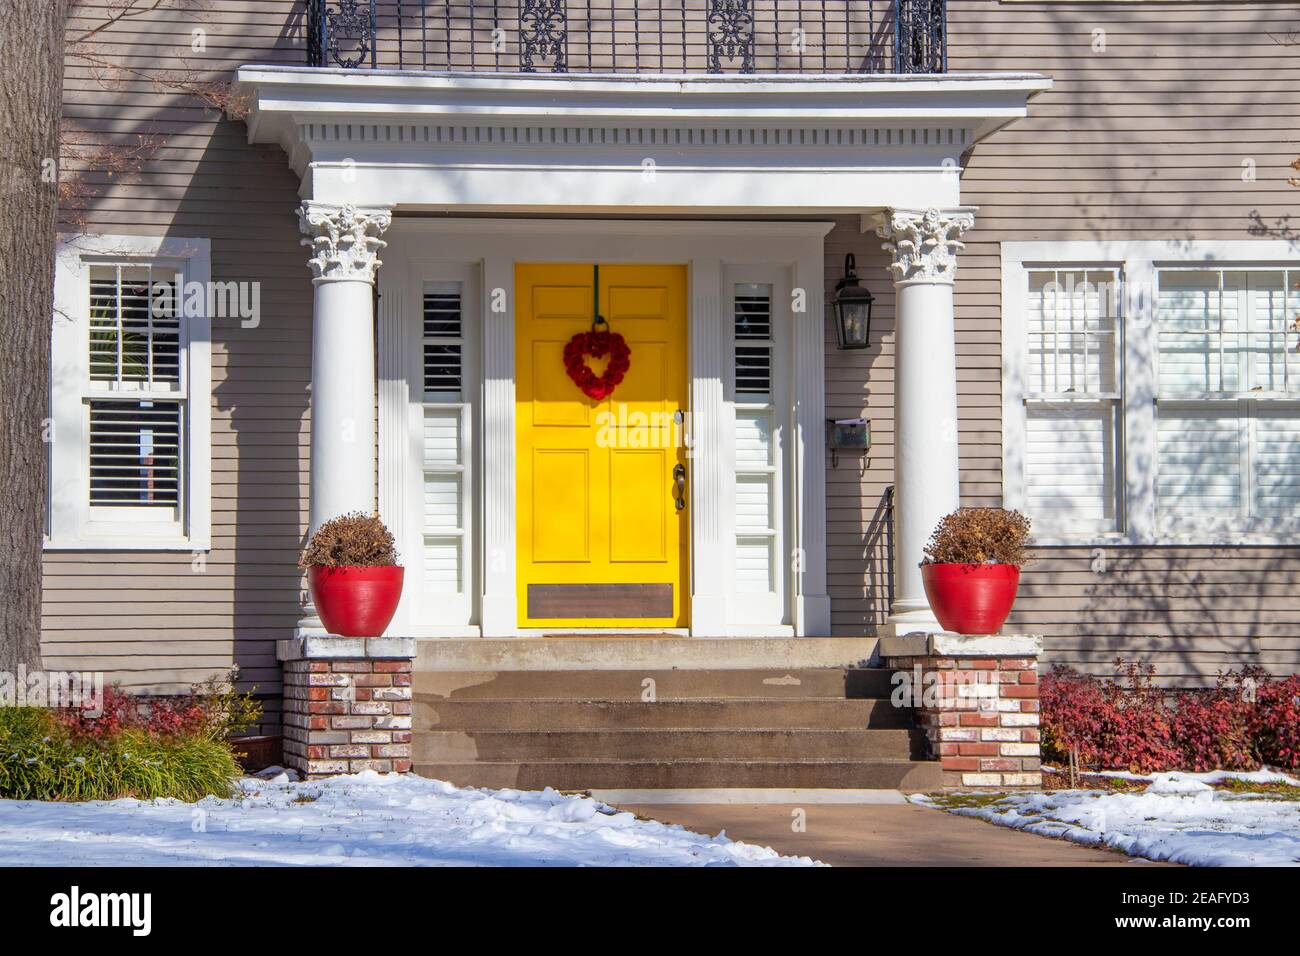 Entrance of pretty vintage house with ornate columns on porch and red valentine wreath on bright yellow door in snow Stock Photo